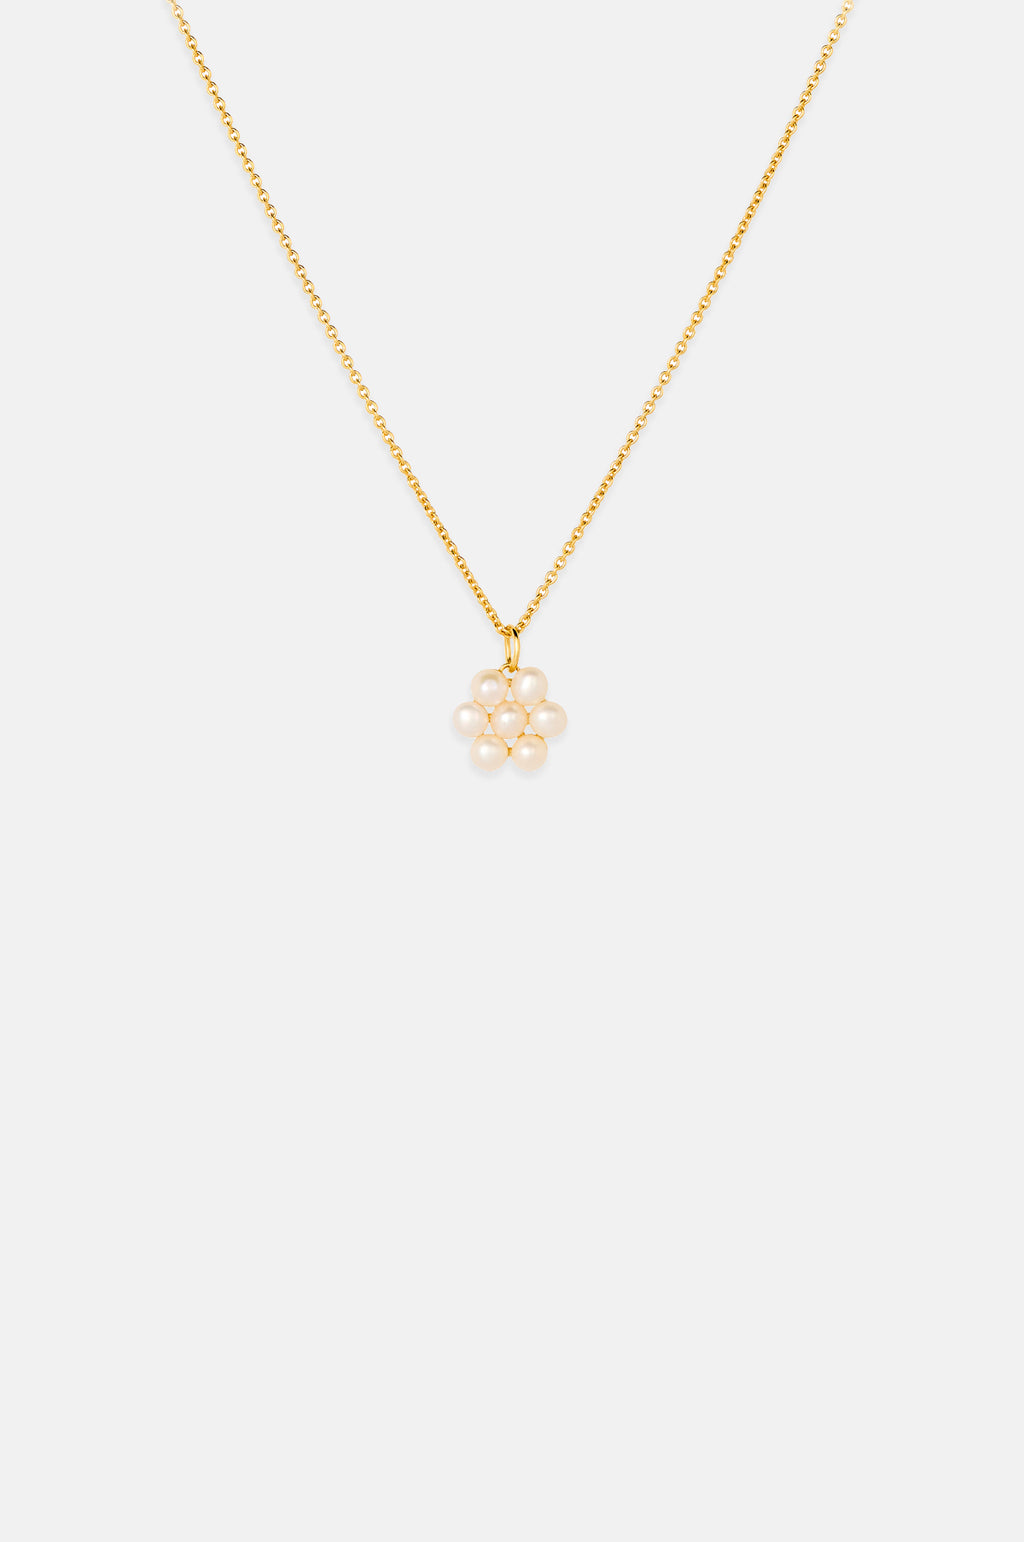 Heitage Bloom Necklace | Kate Spade New York